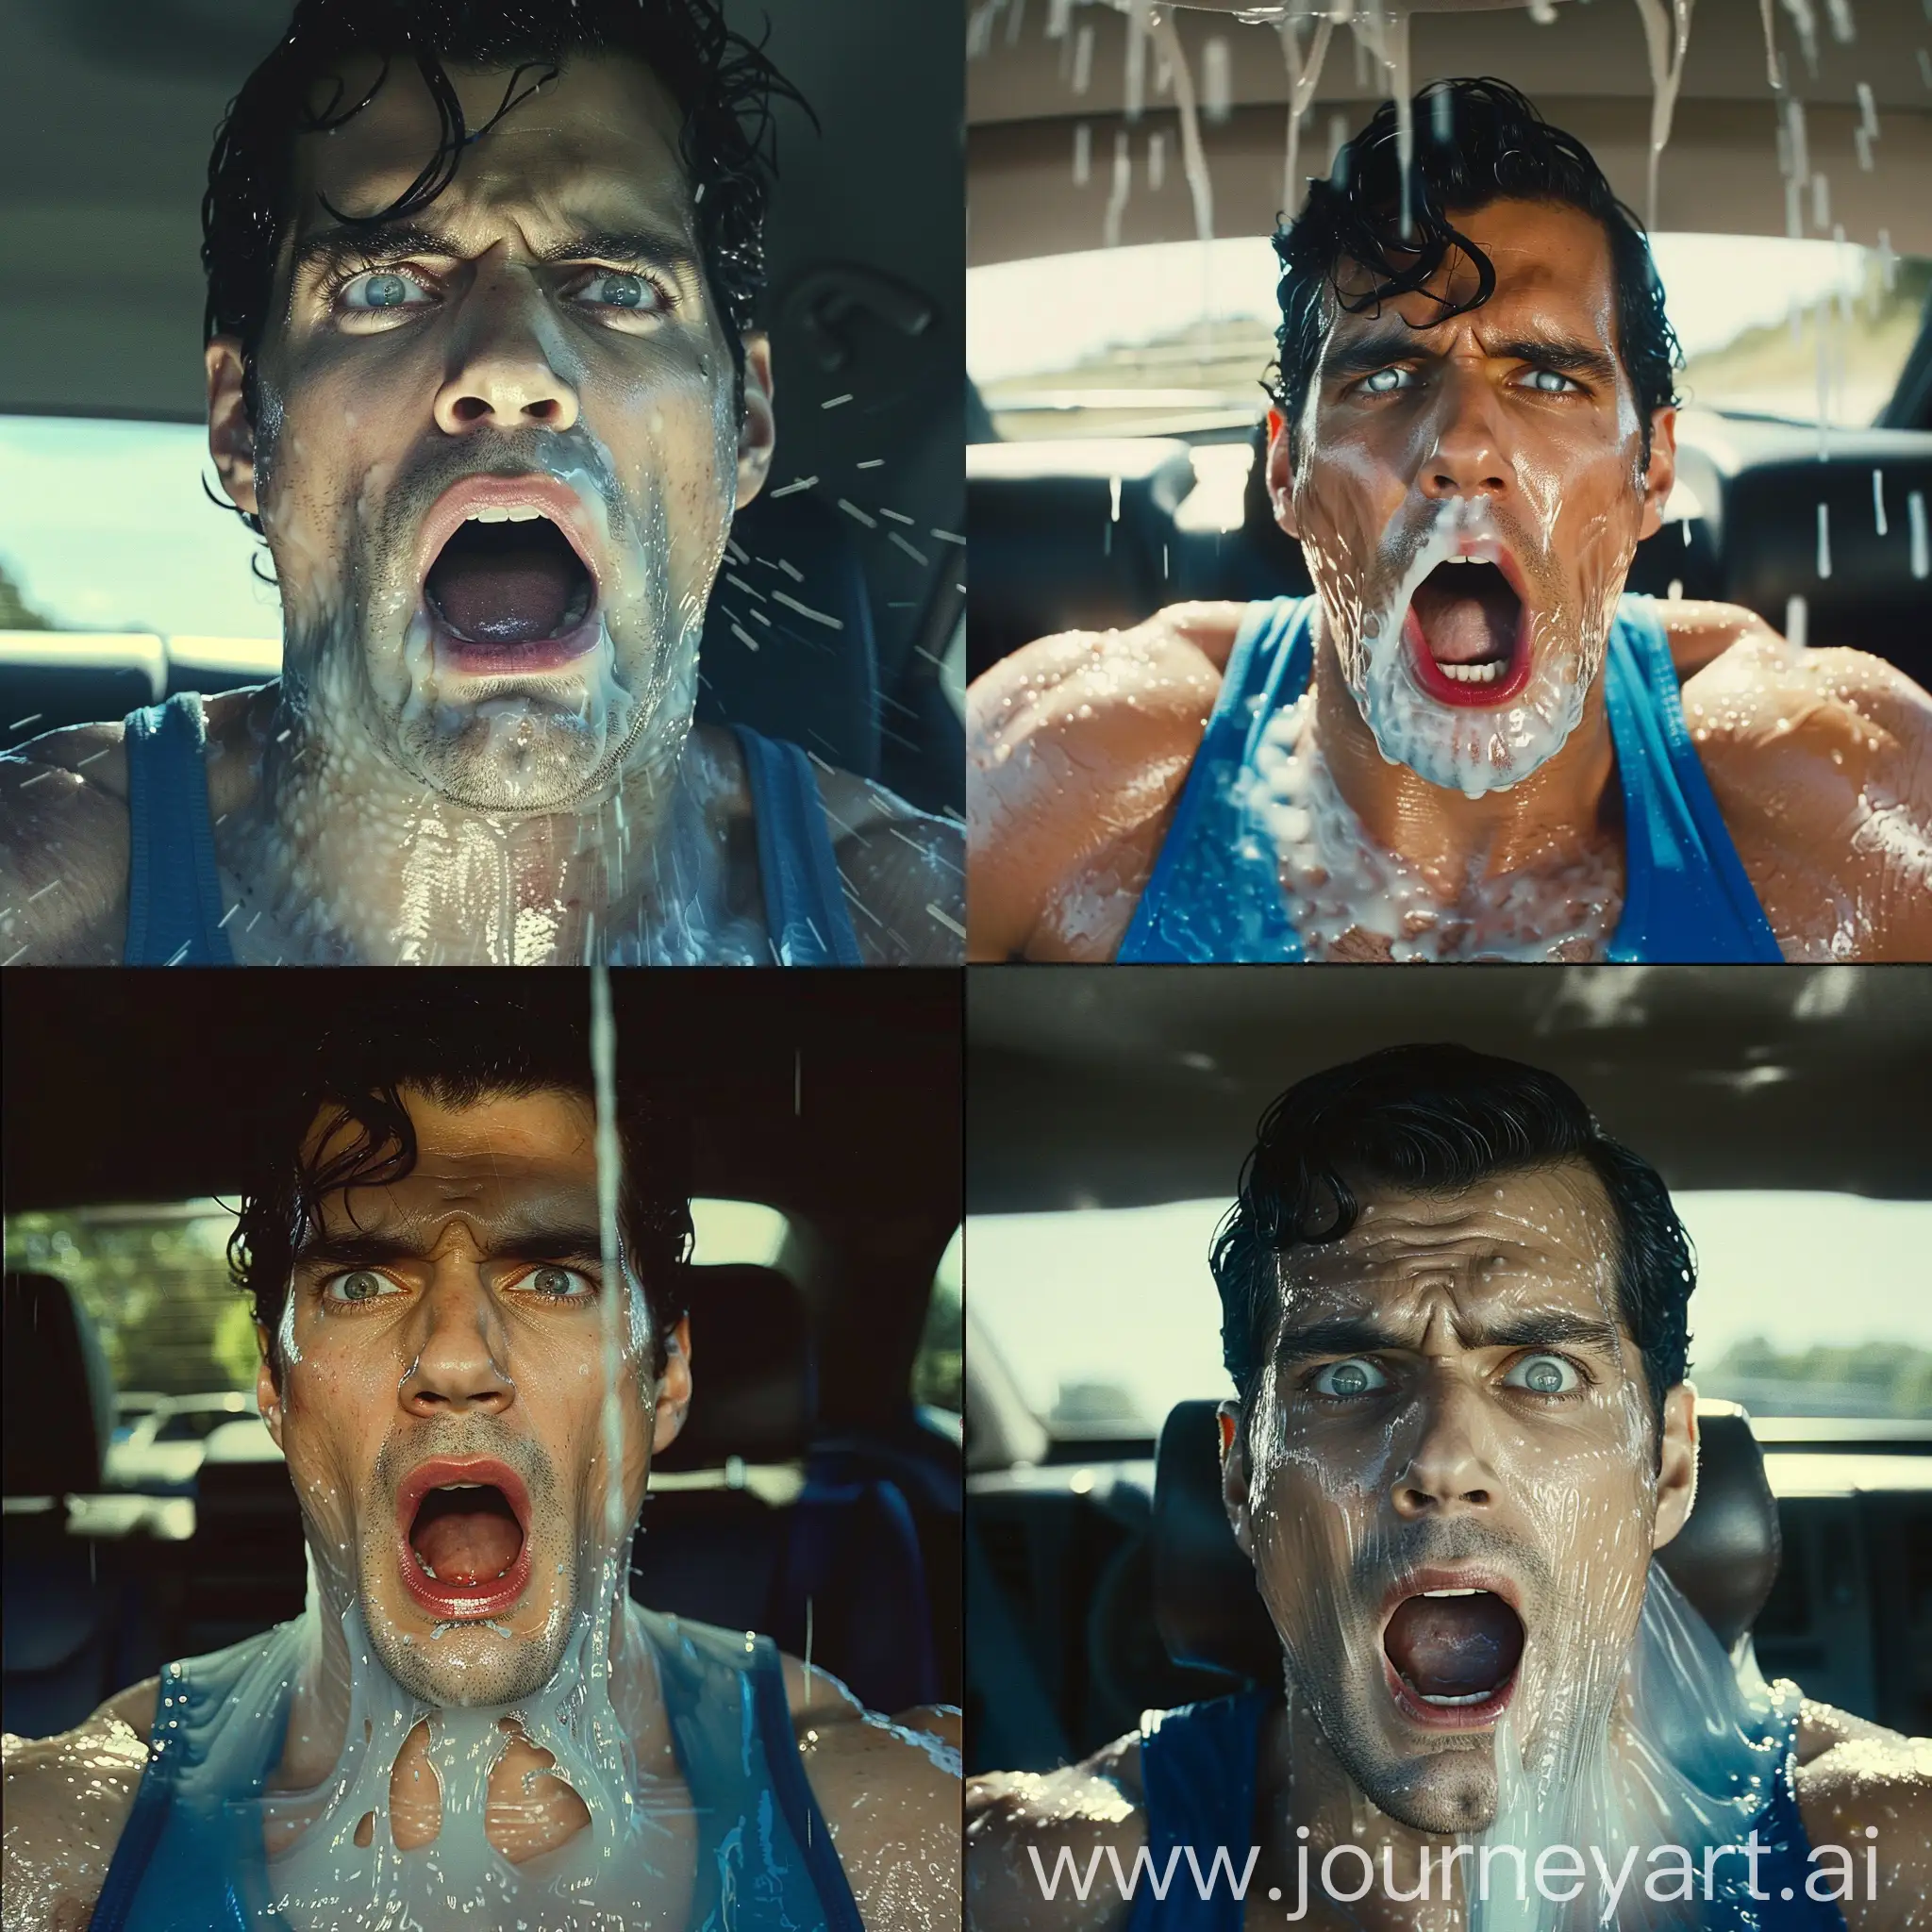 Henry-Cavill-Sweaty-in-Blue-Tank-Top-Yawning-Inside-Car-with-Transparent-Drool